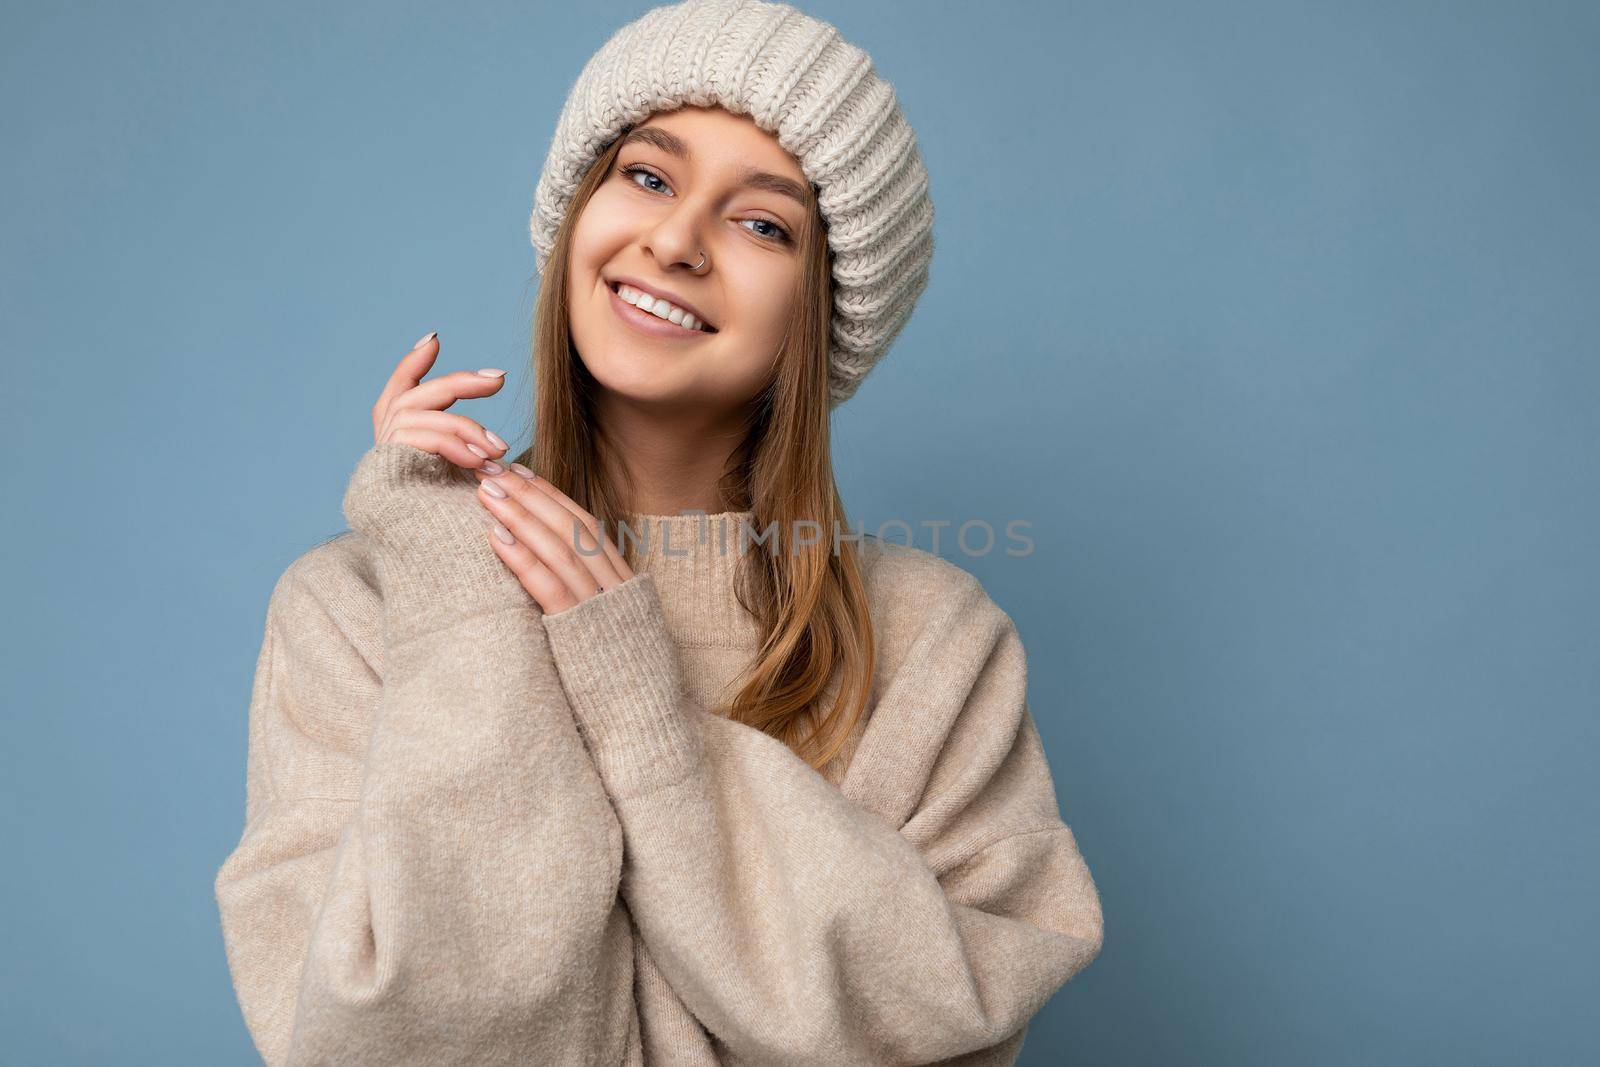 Portrait of fascinating smiling happy young dark blonde woman isolated over blue background wall wearing beige warm sweater and knitted beige hat looking at camera. Free space